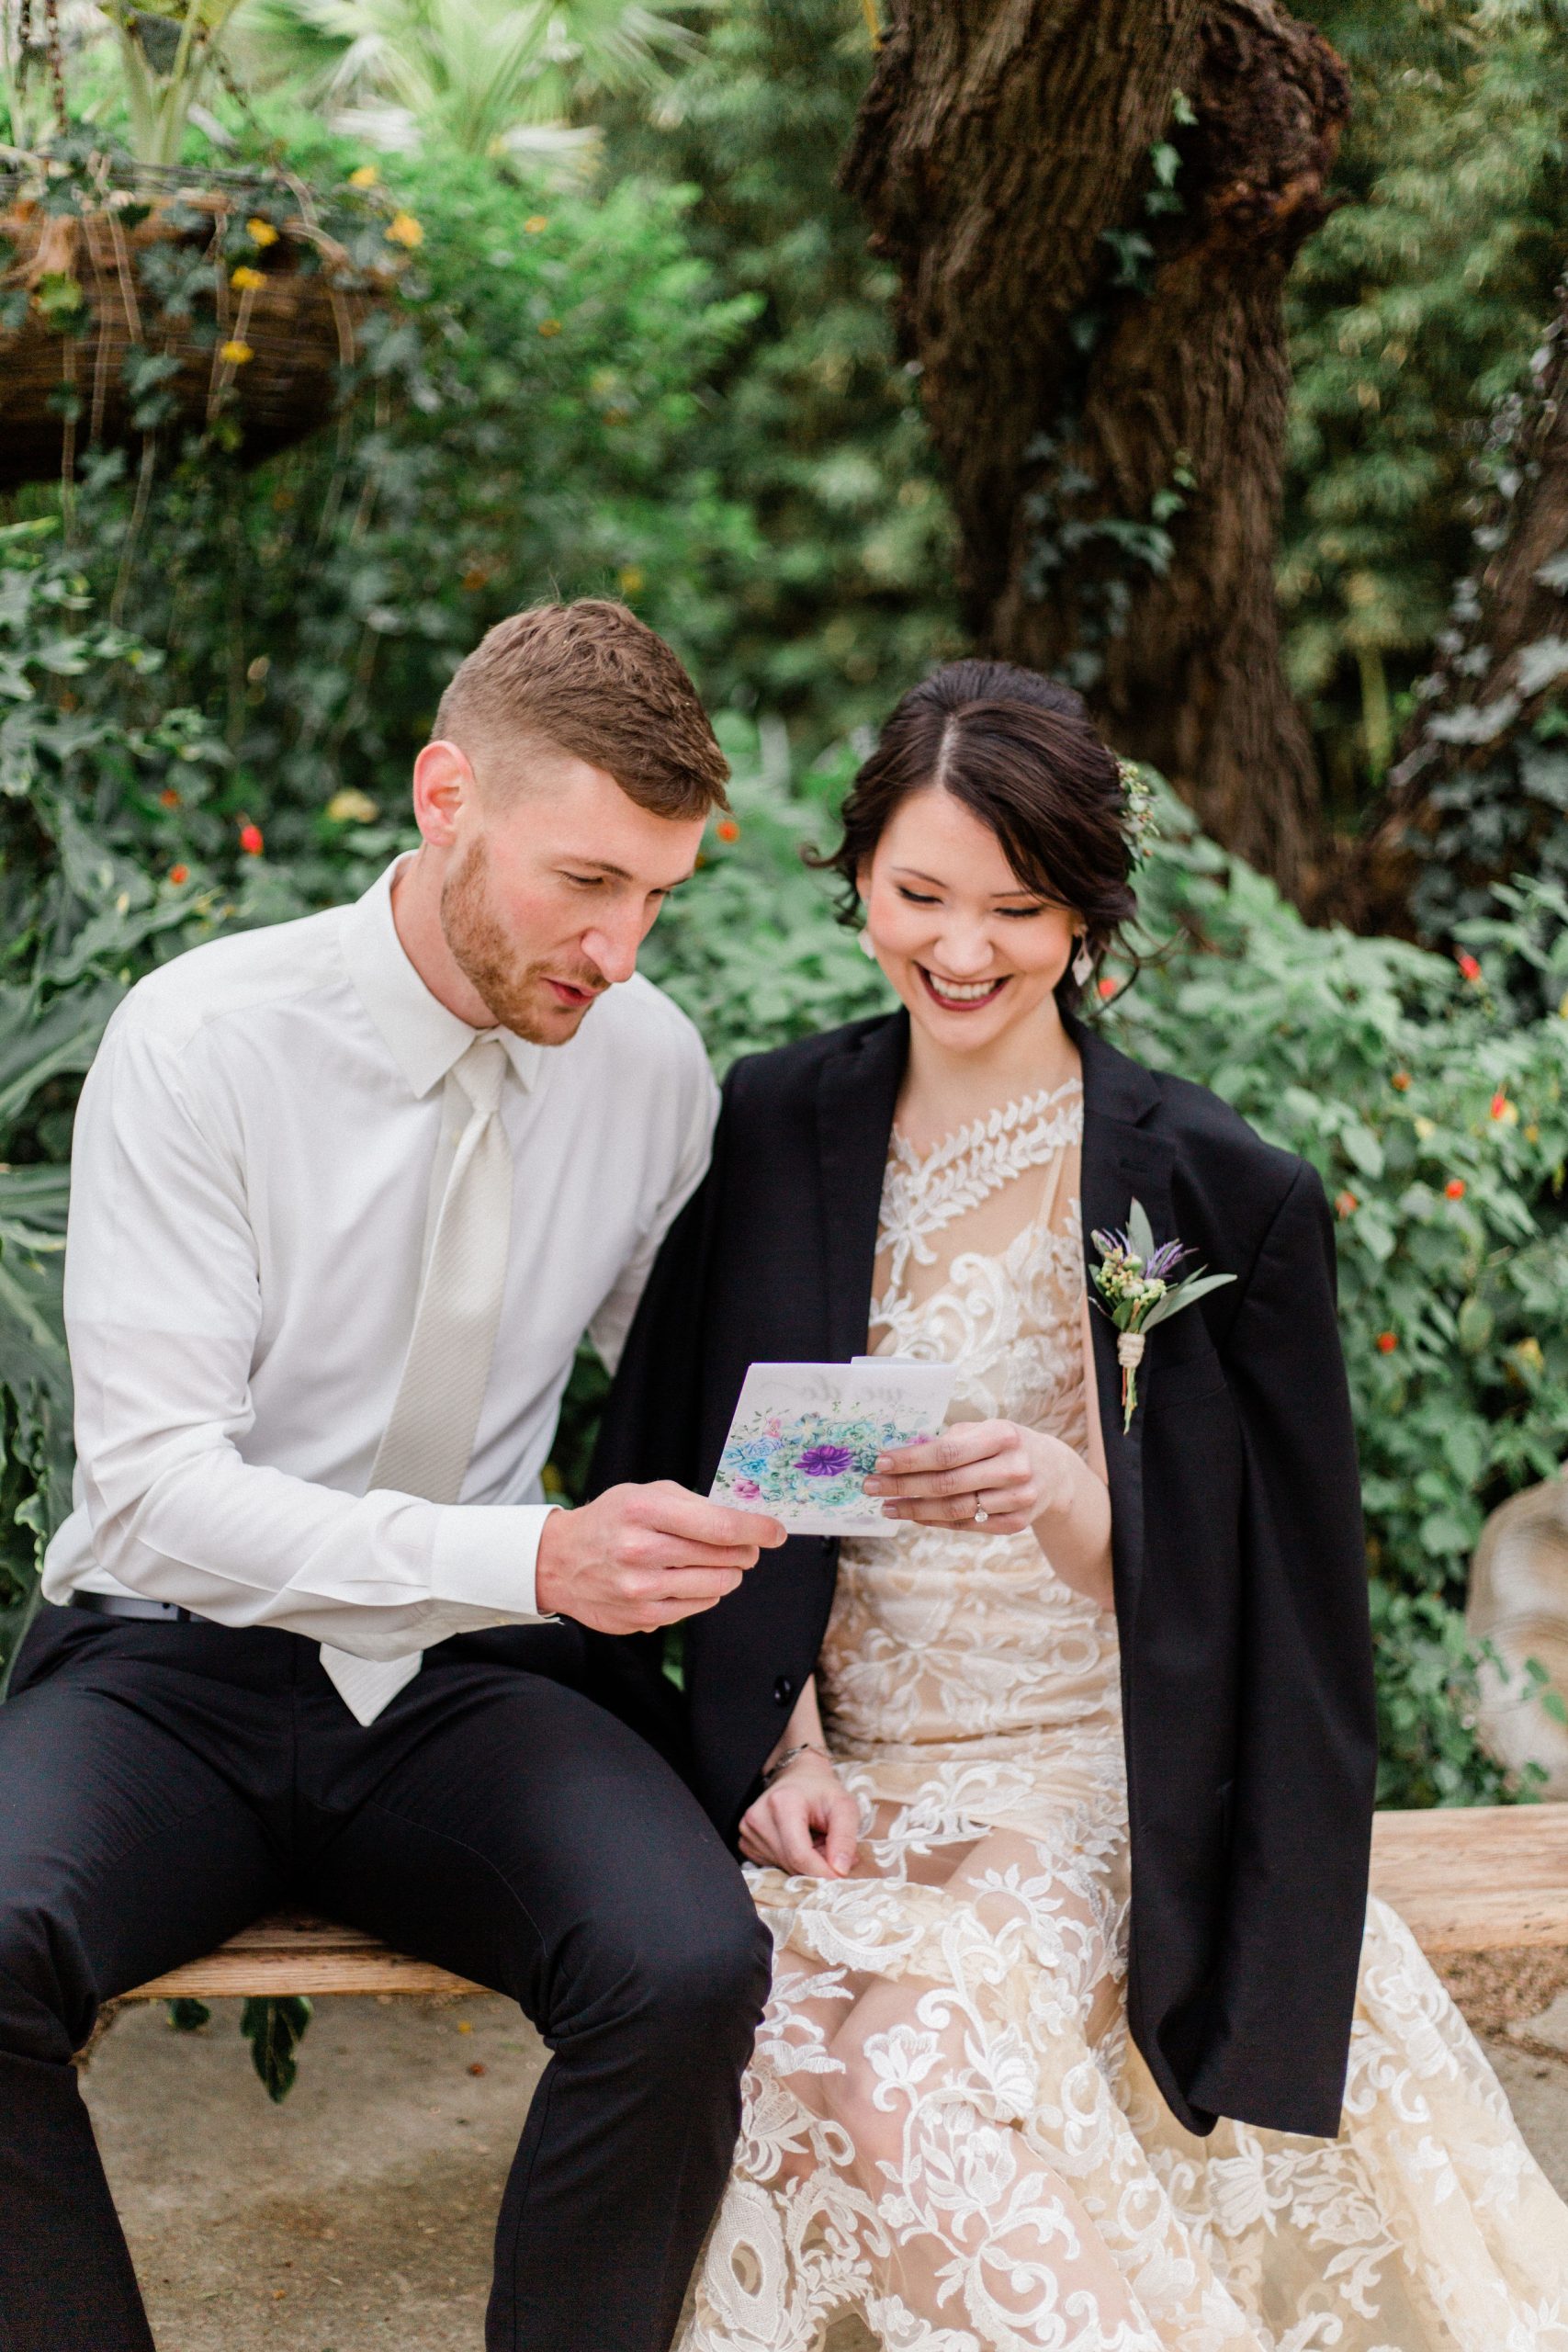 A bride and groom sitting on a bench reading a romantic letter.